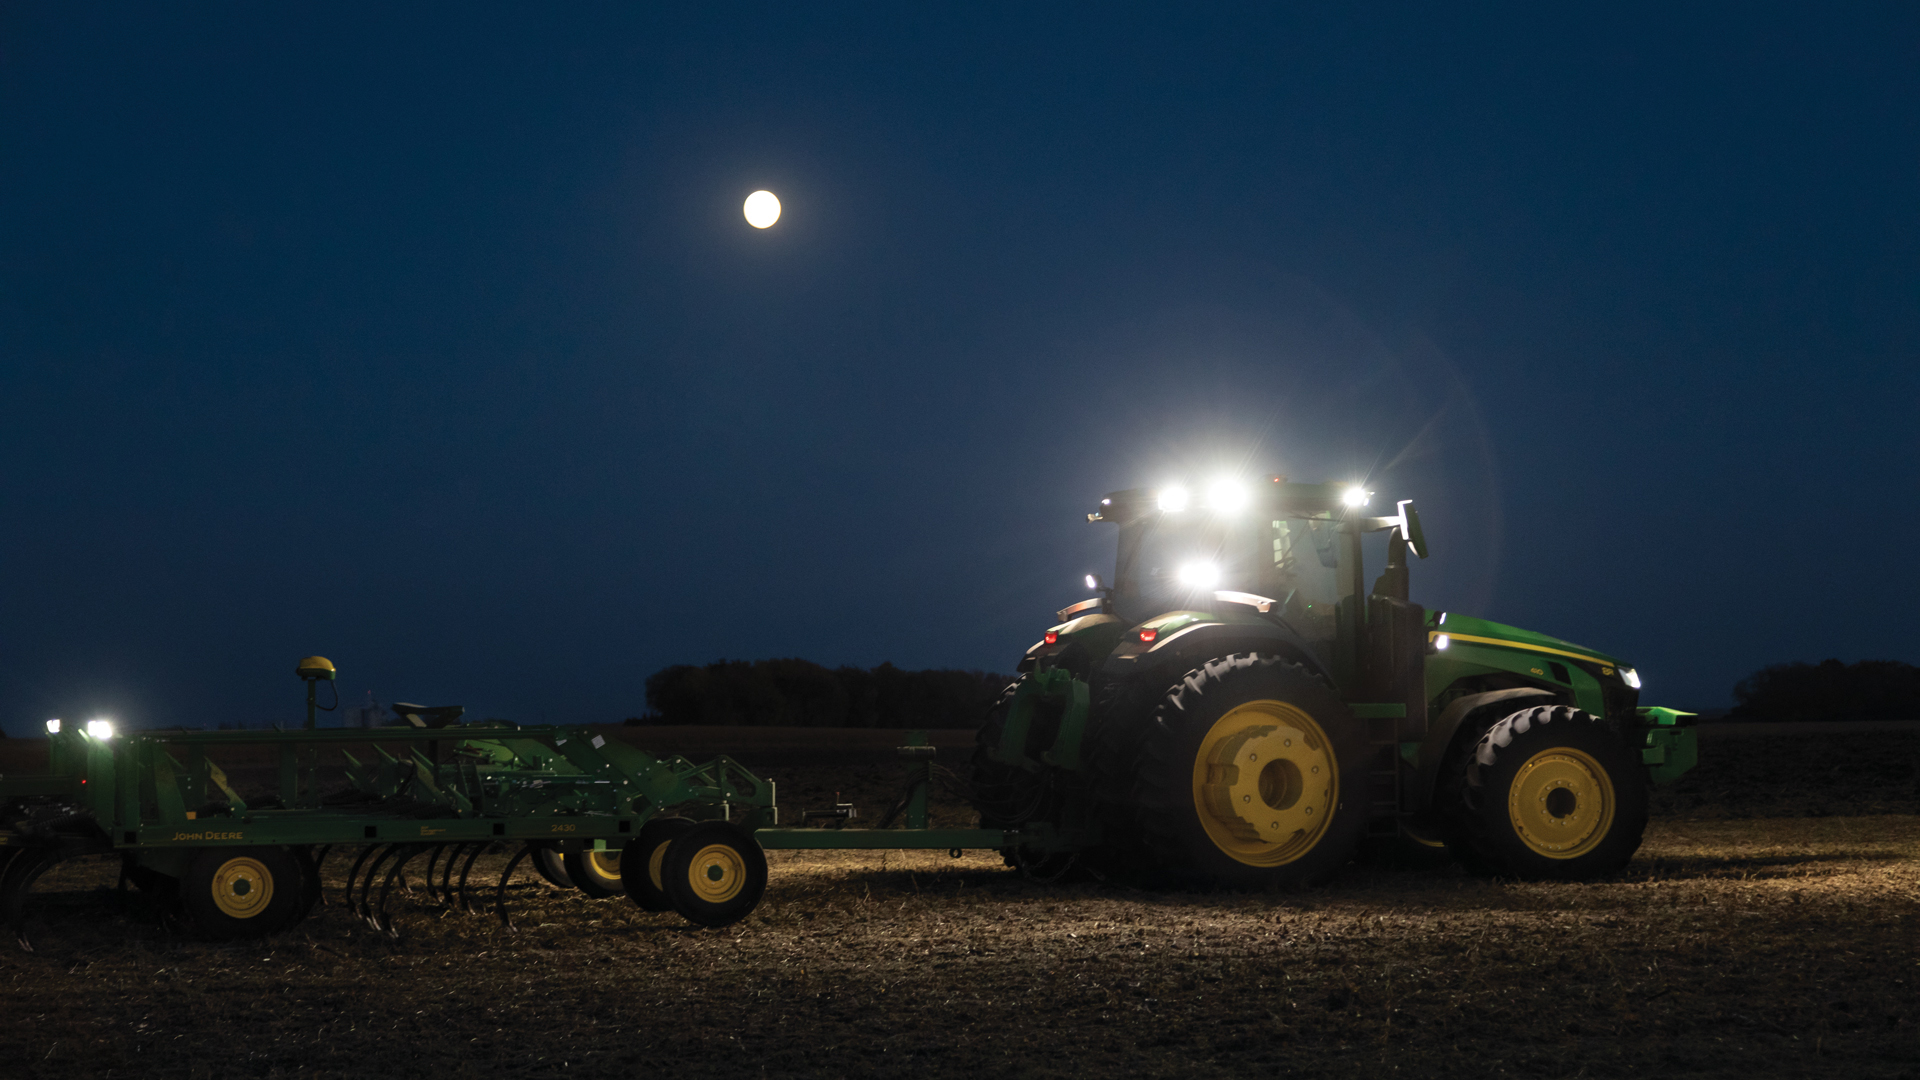 Tractor working at night 